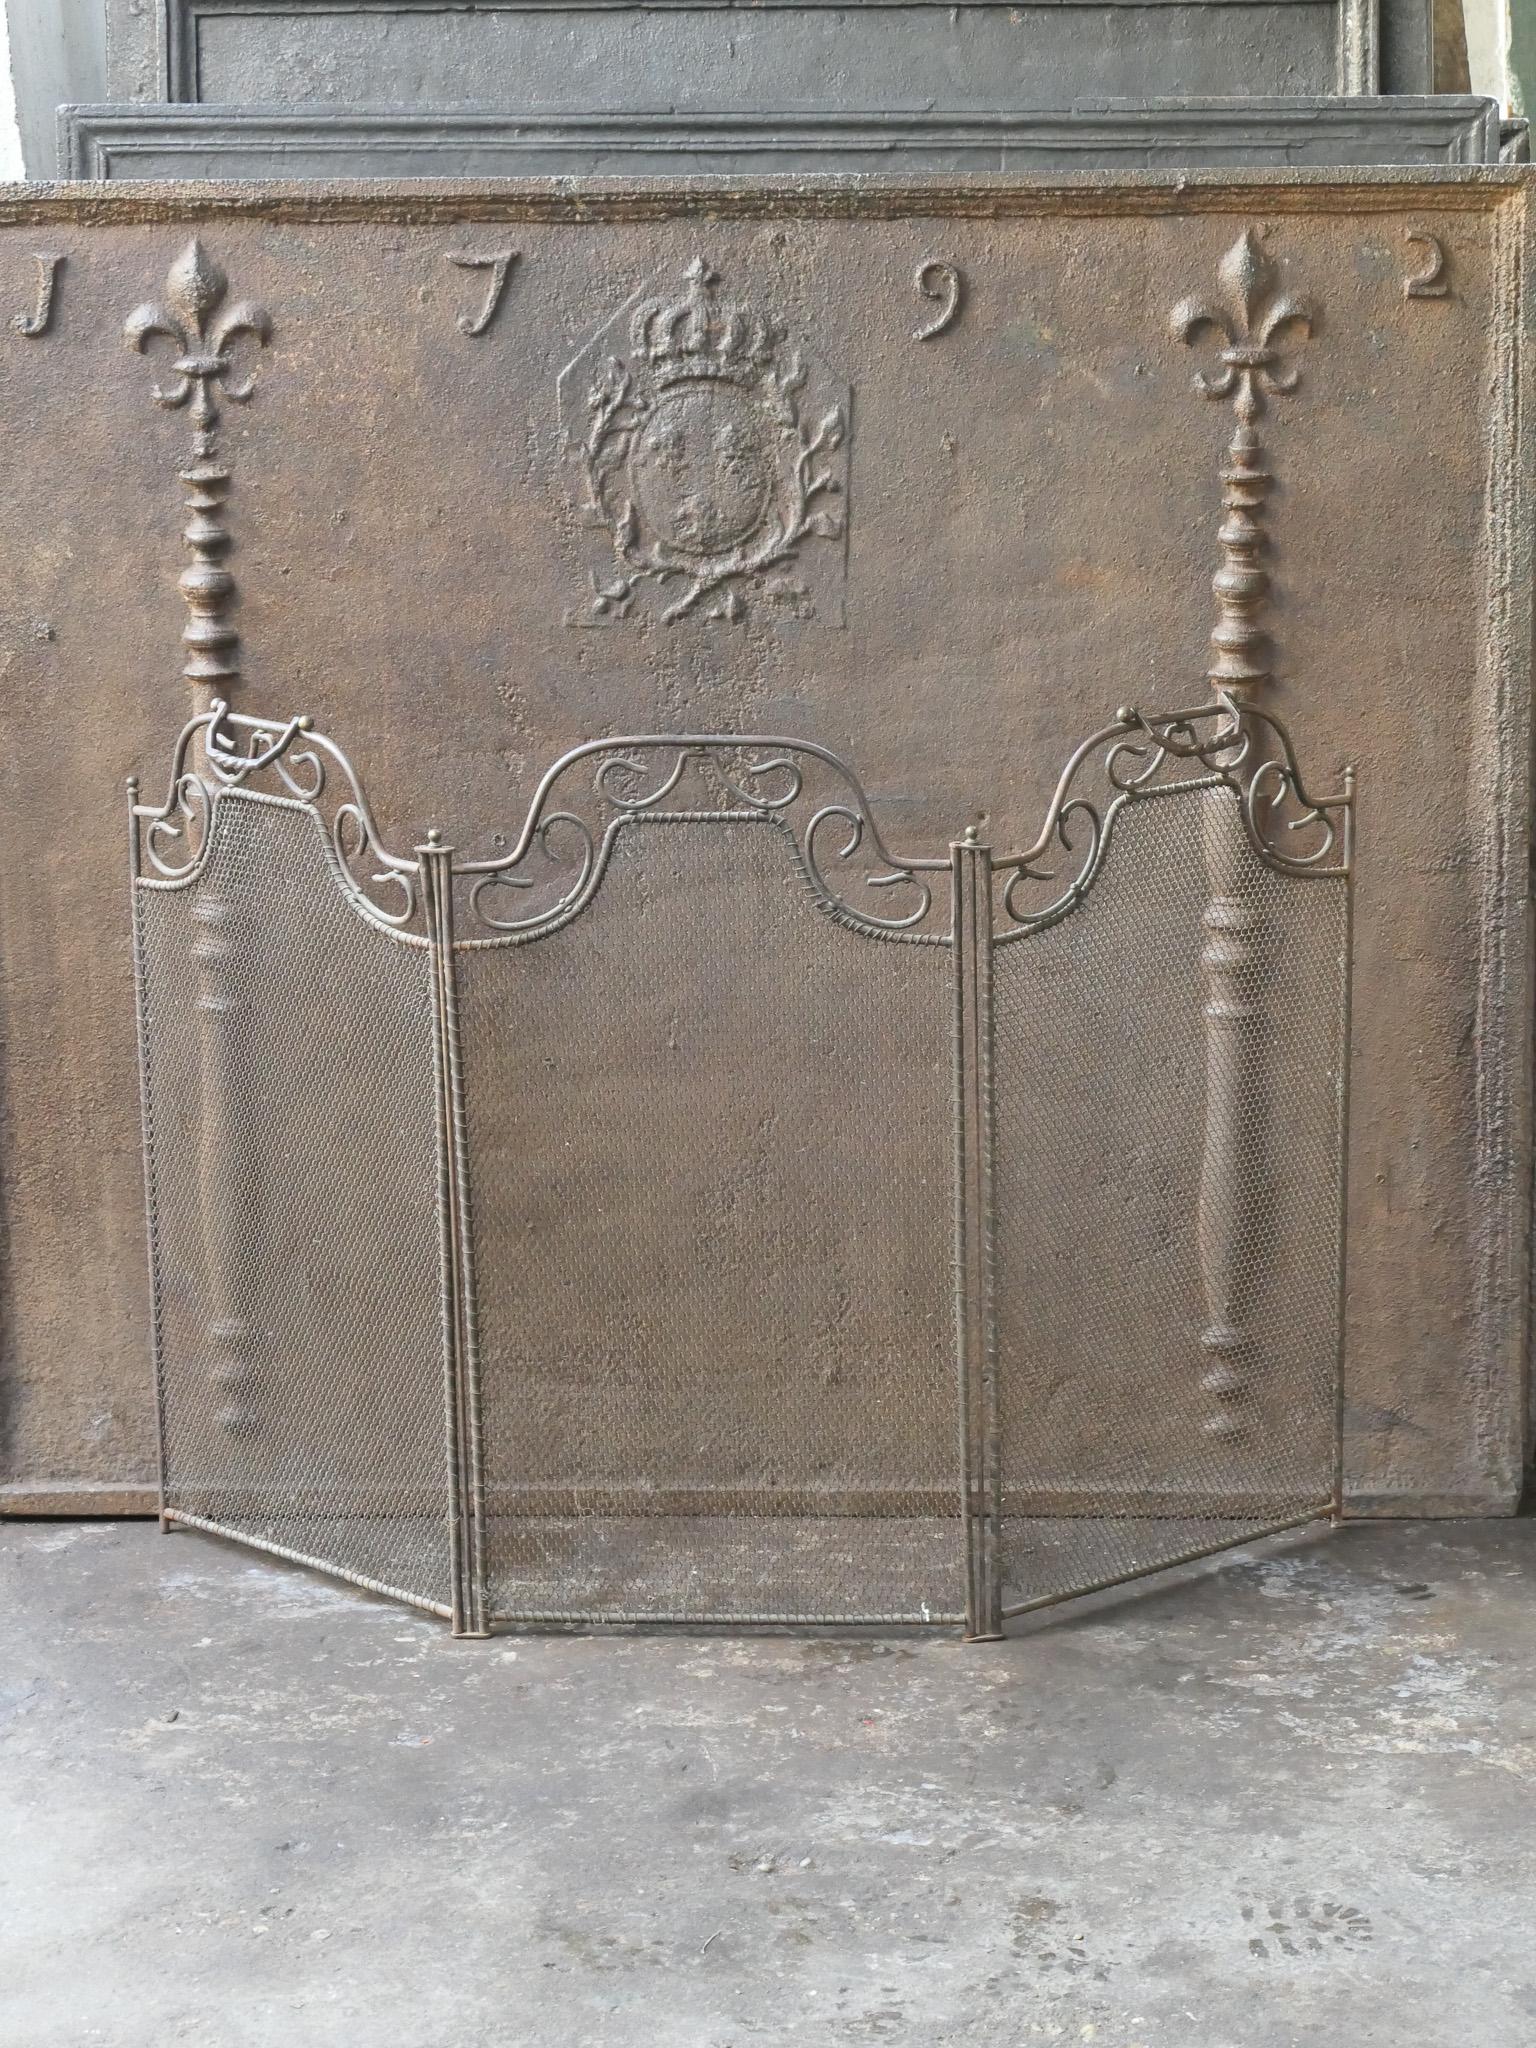 Late 19th or early 20th century French Art Deco 3-panel fireplace screen. The screen is made of brass, iron and iron mesh. The fireplace screen is in a good condition, but has some damage to the wiring of the iron mesh (see photo's). It is still